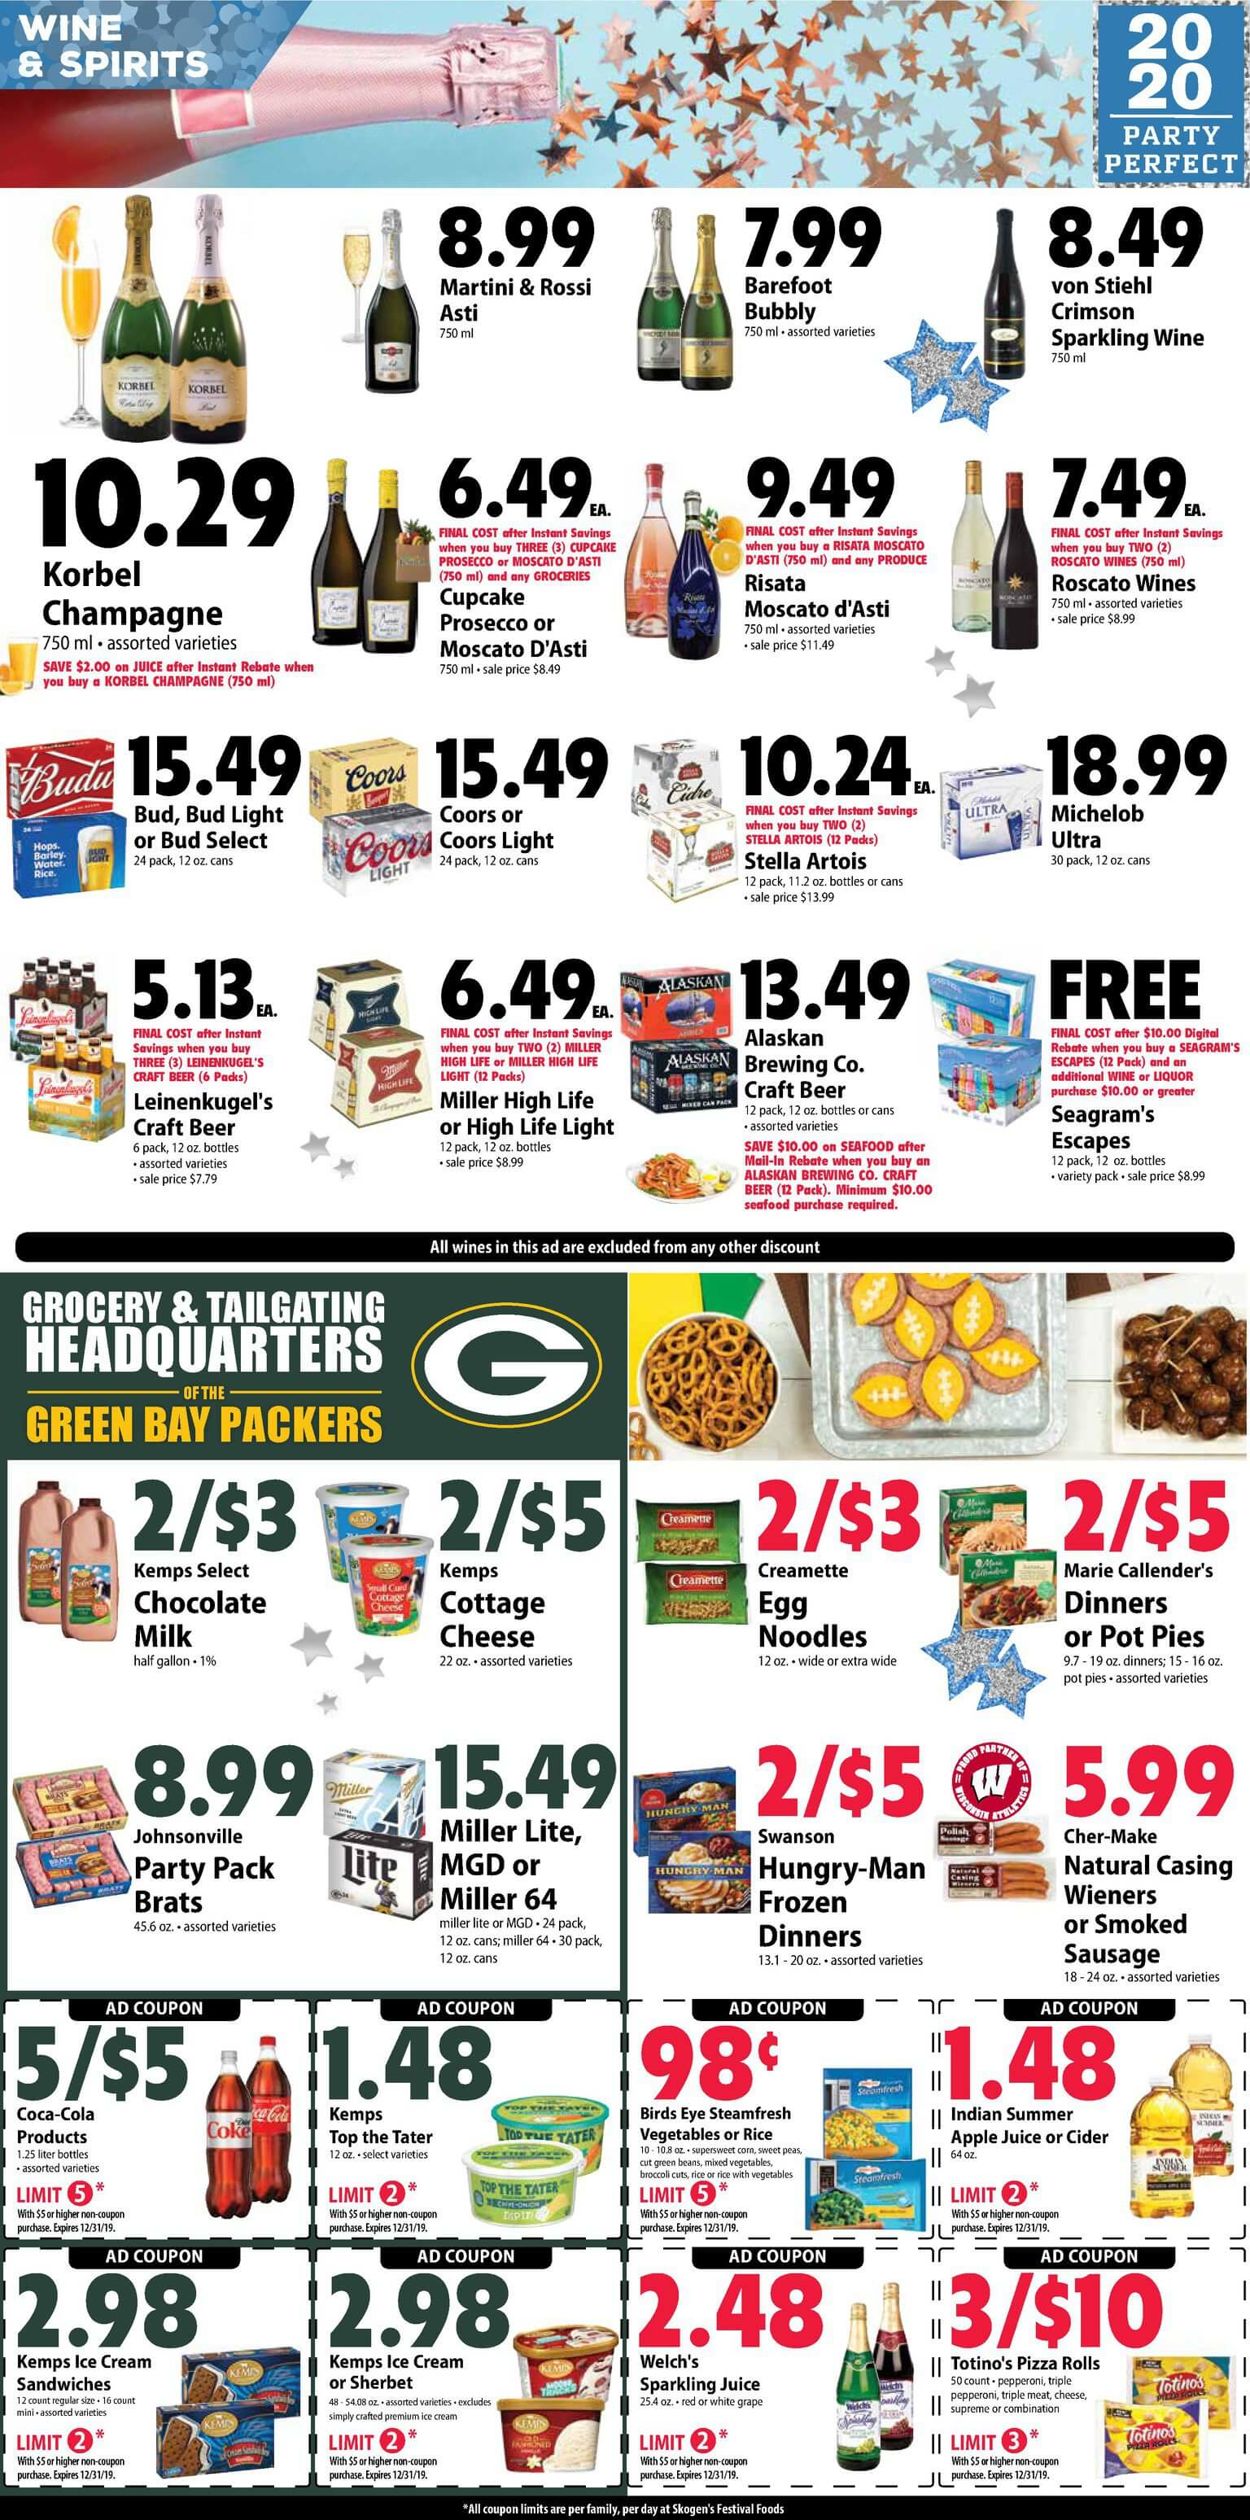 Festival Foods - New Year's Ad 2019/2020 Weekly Ad Circular - valid 12/25-12/31/2019 (Page 8)